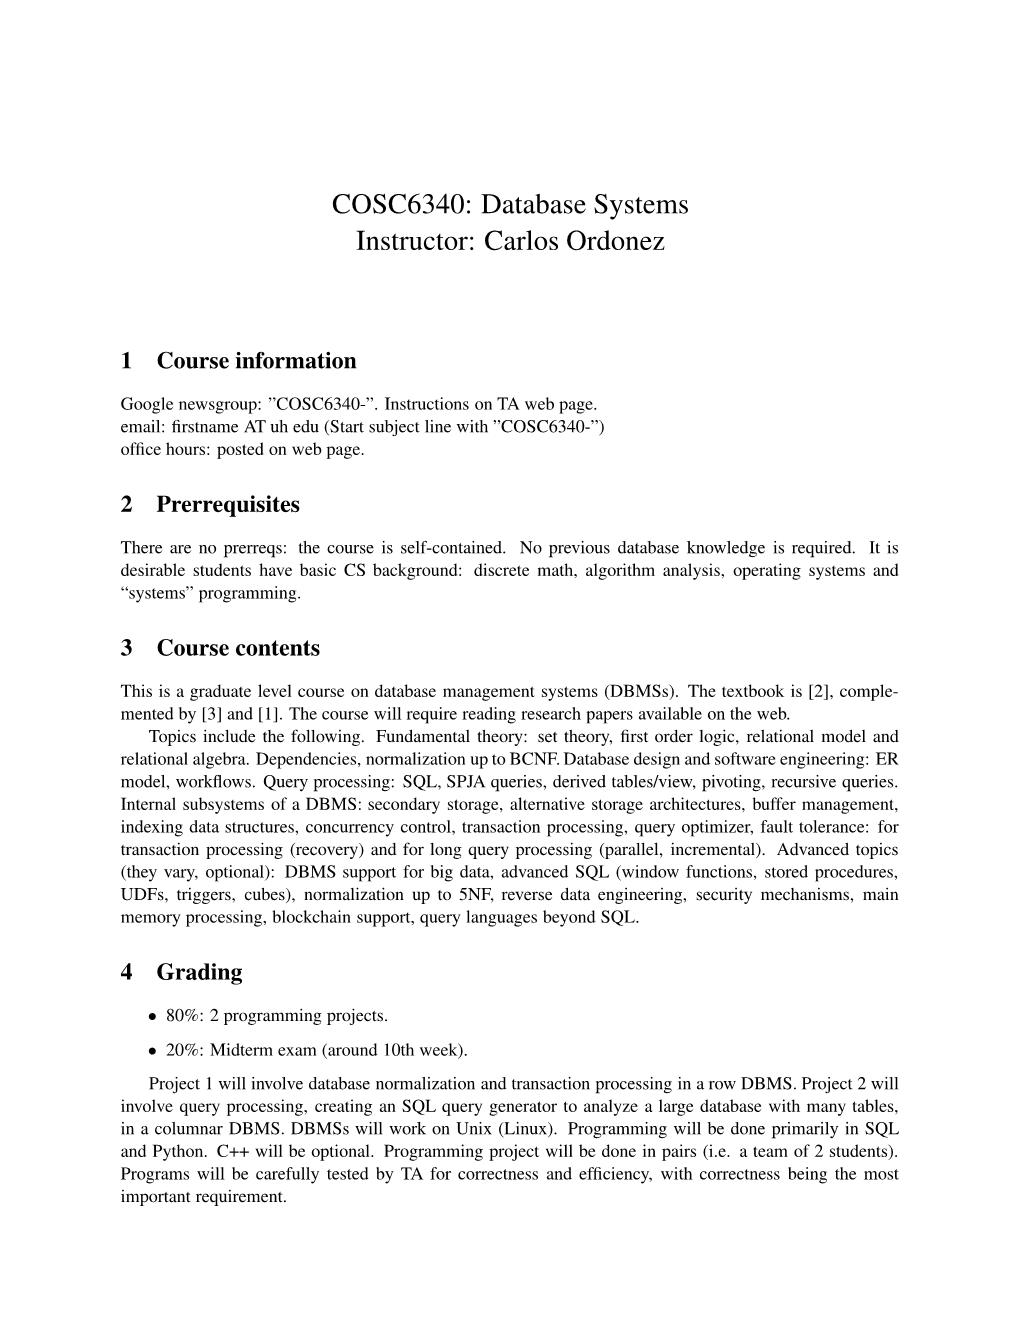 COSC6340: Database Systems Instructor: Carlos Ordonez